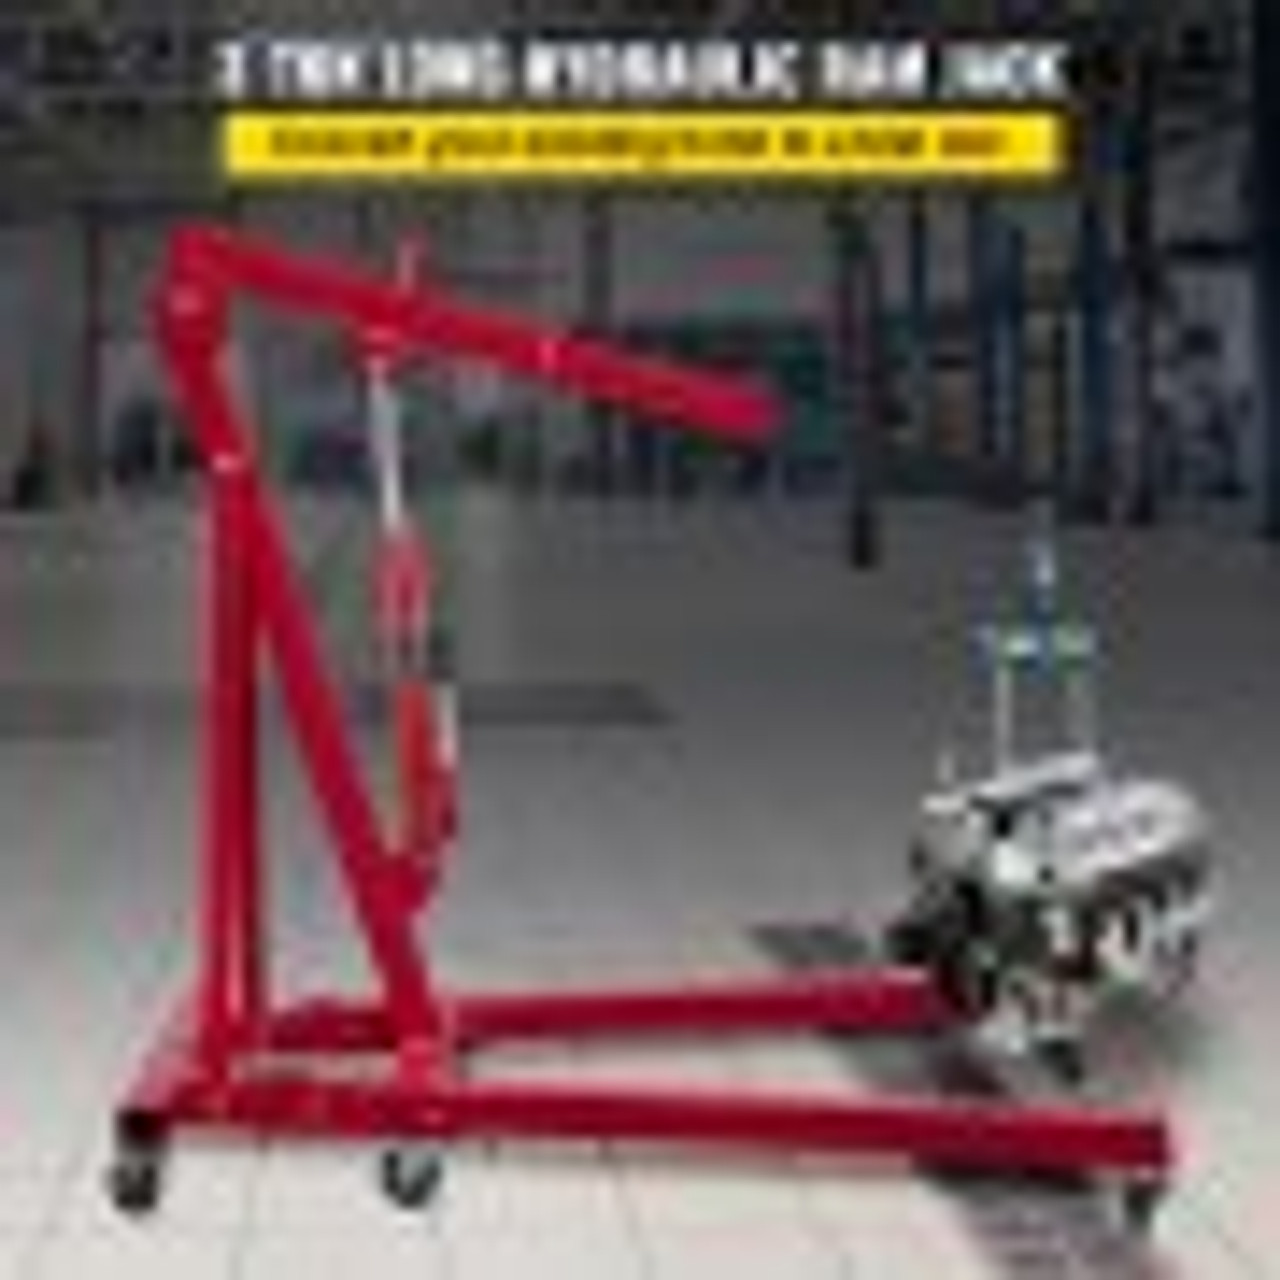 Hydraulic Long Ram Jack, 3 Tons/6600 lbs Capacity, with Single Piston Pump and Clevis Base, Manual Cherry Picker w/Handle, for Garage/Shop Cranes, Engine Lift Hoist, Red